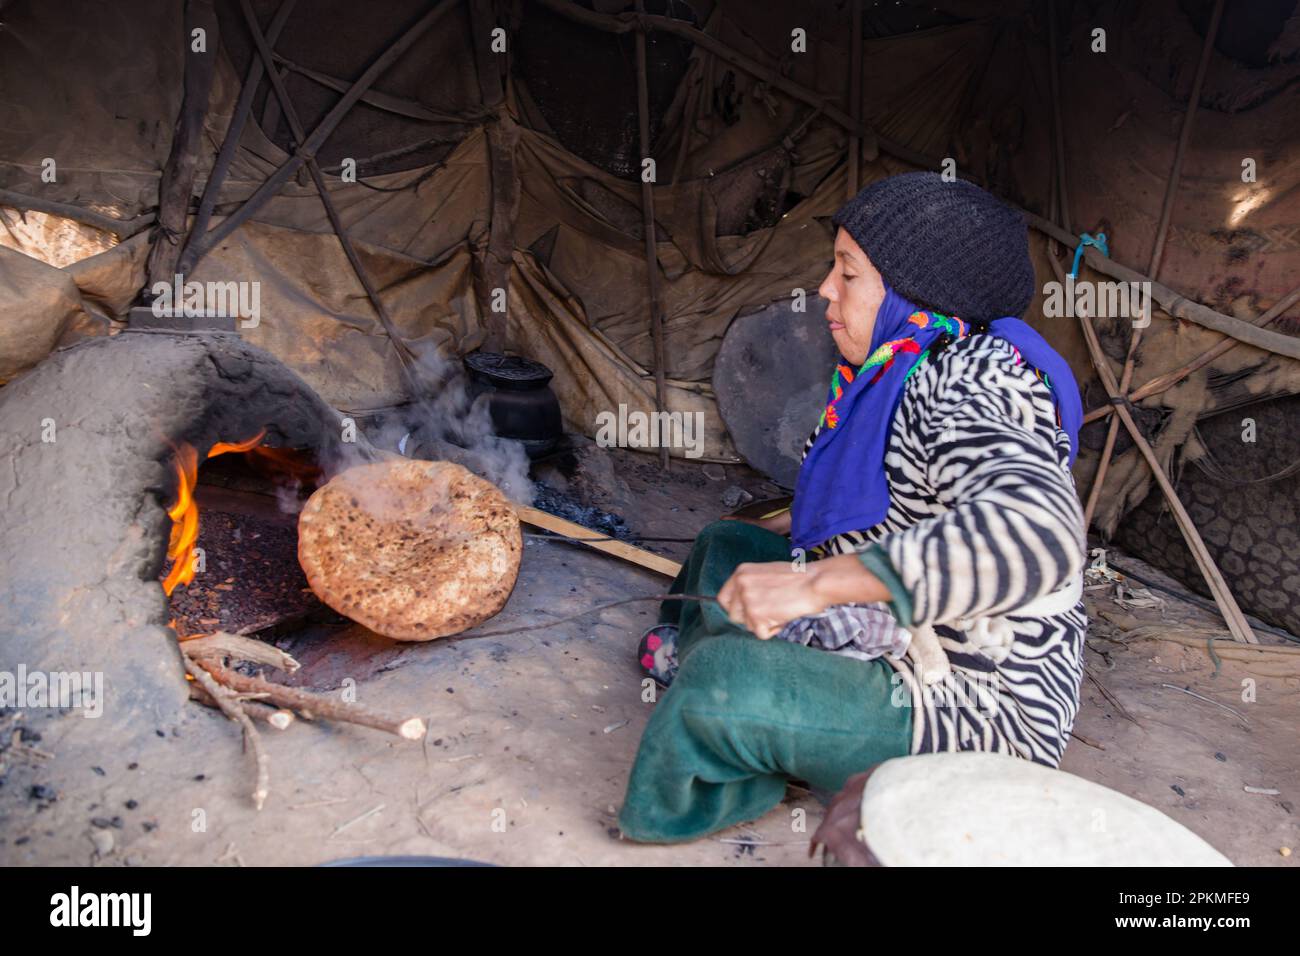 A Moroccan woman cooks a berber pizza in a wood burning oven Stock Photo